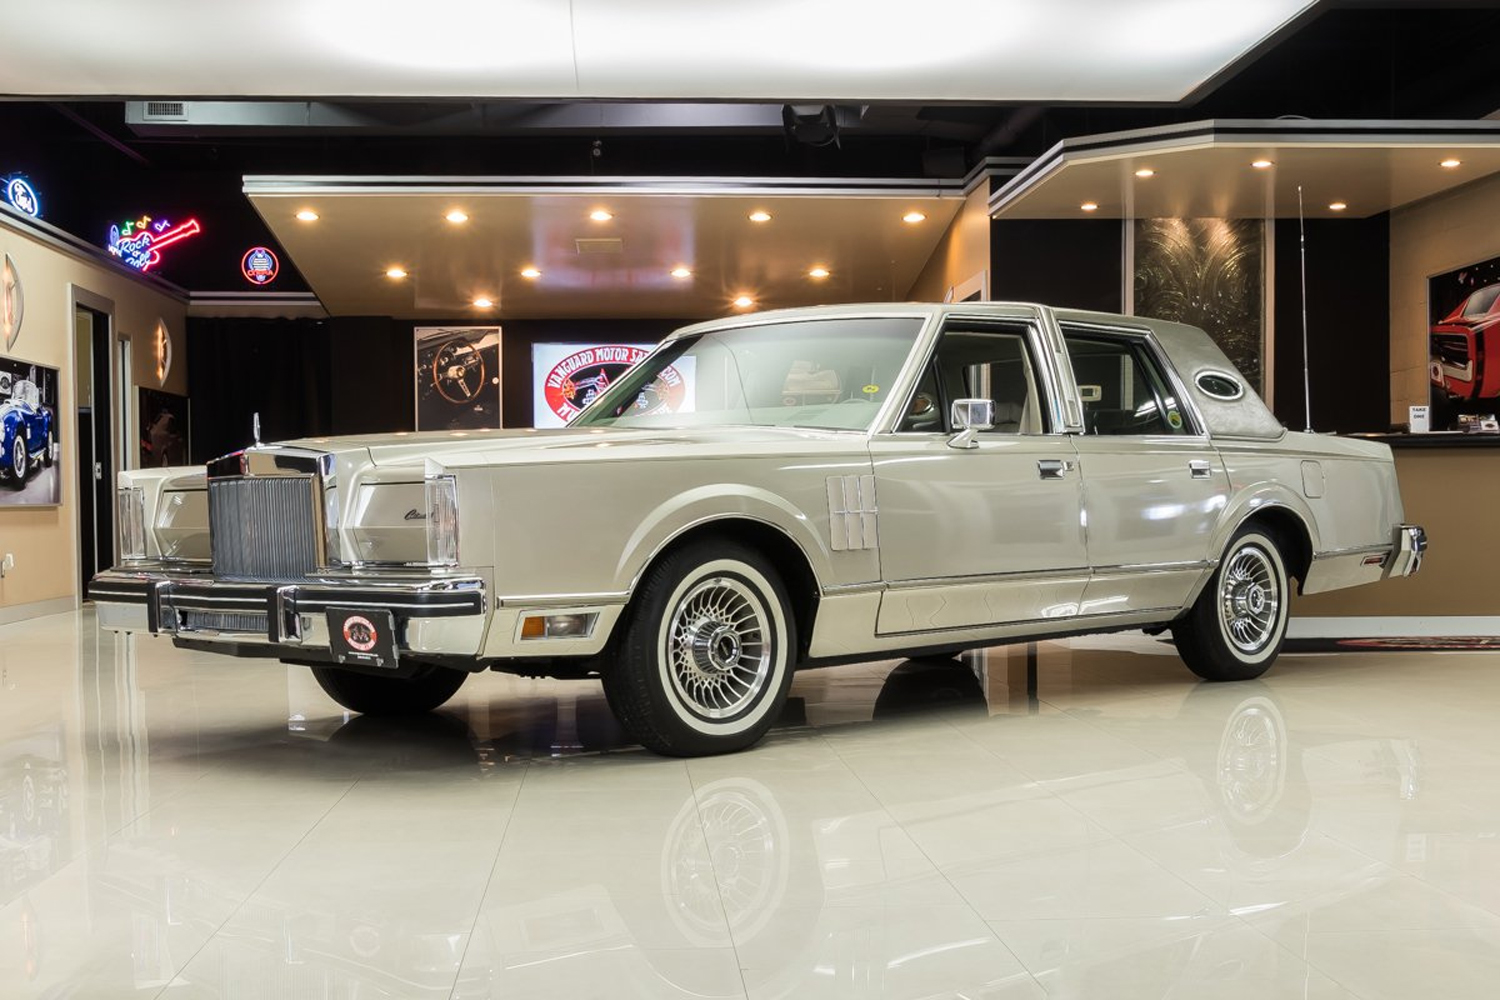 1980 Lincoln Continental Mark VI Has Only 1584 Original Miles: Video